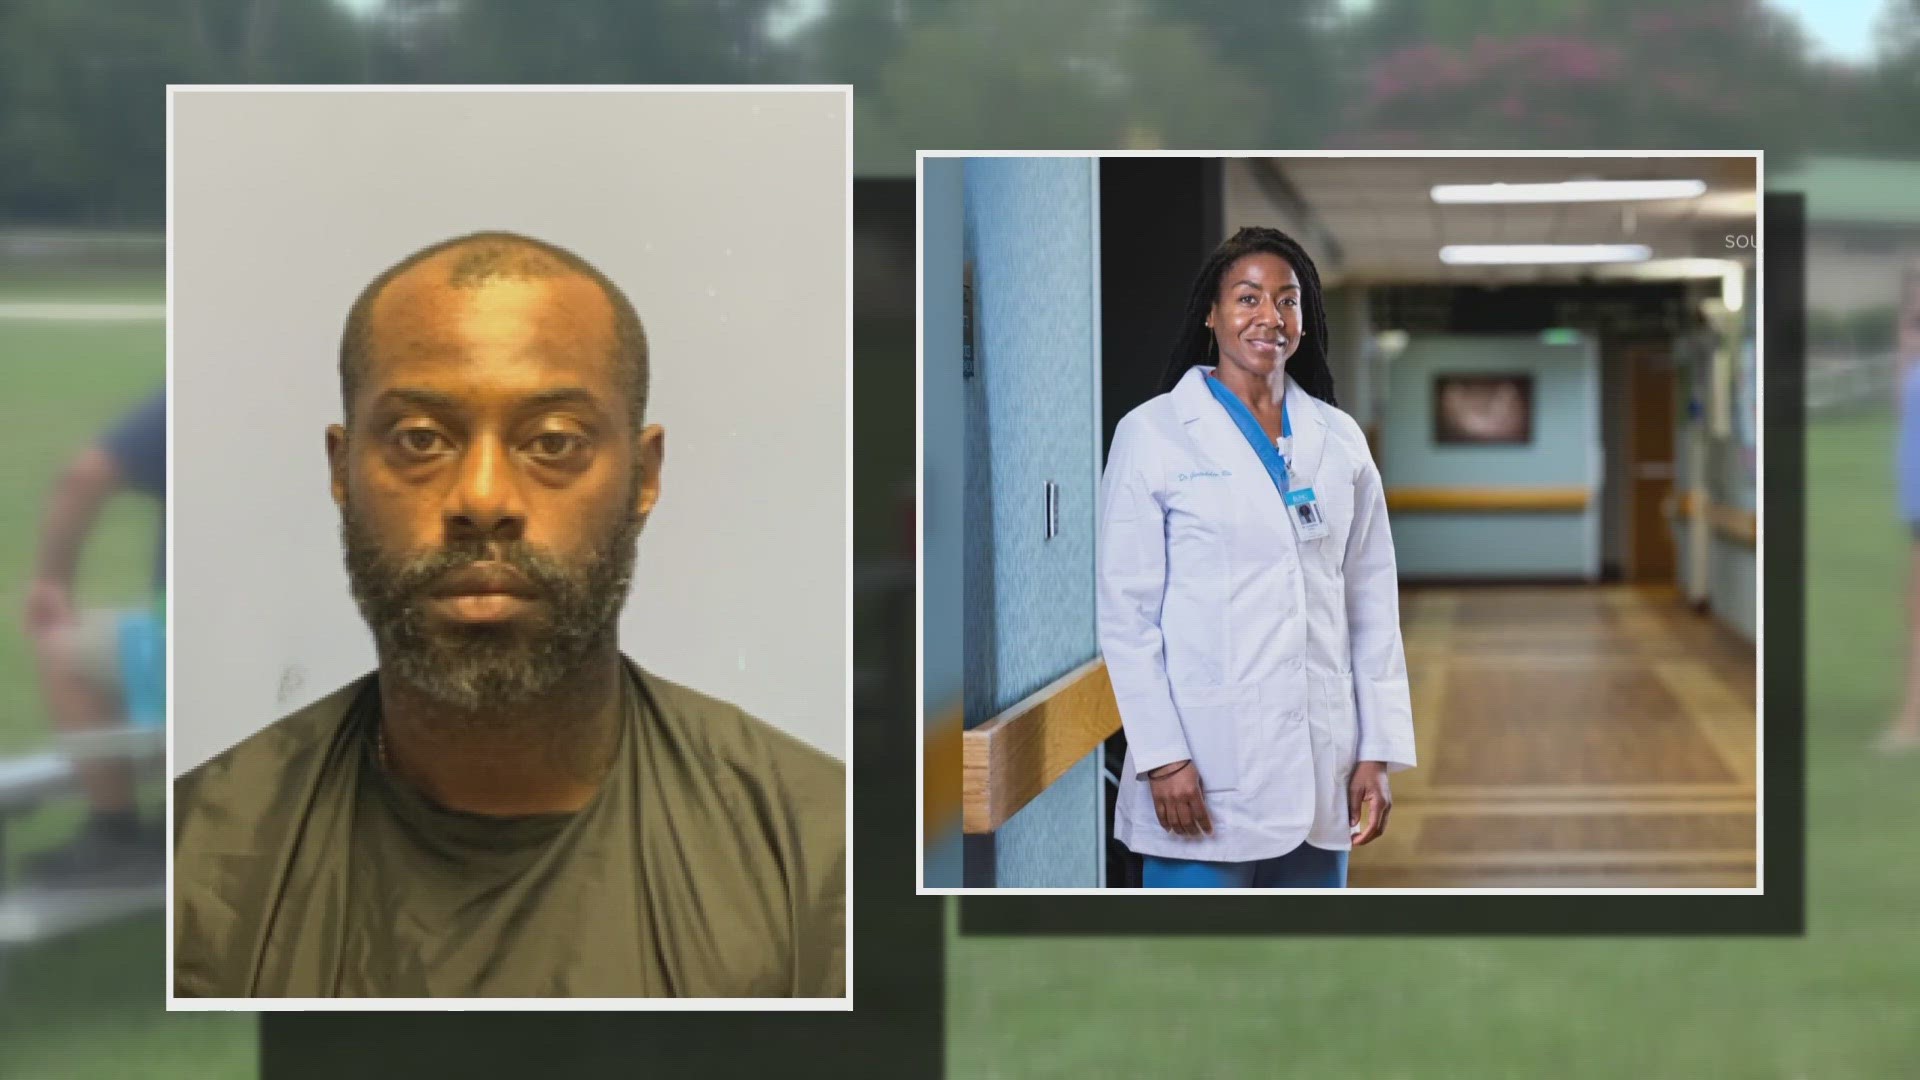 40-year-old Dr. Gwendolyn Riddick was an OB/GYN at UNC Women's Health. She was shot and killed by a man she shared a child with at Eden Park.